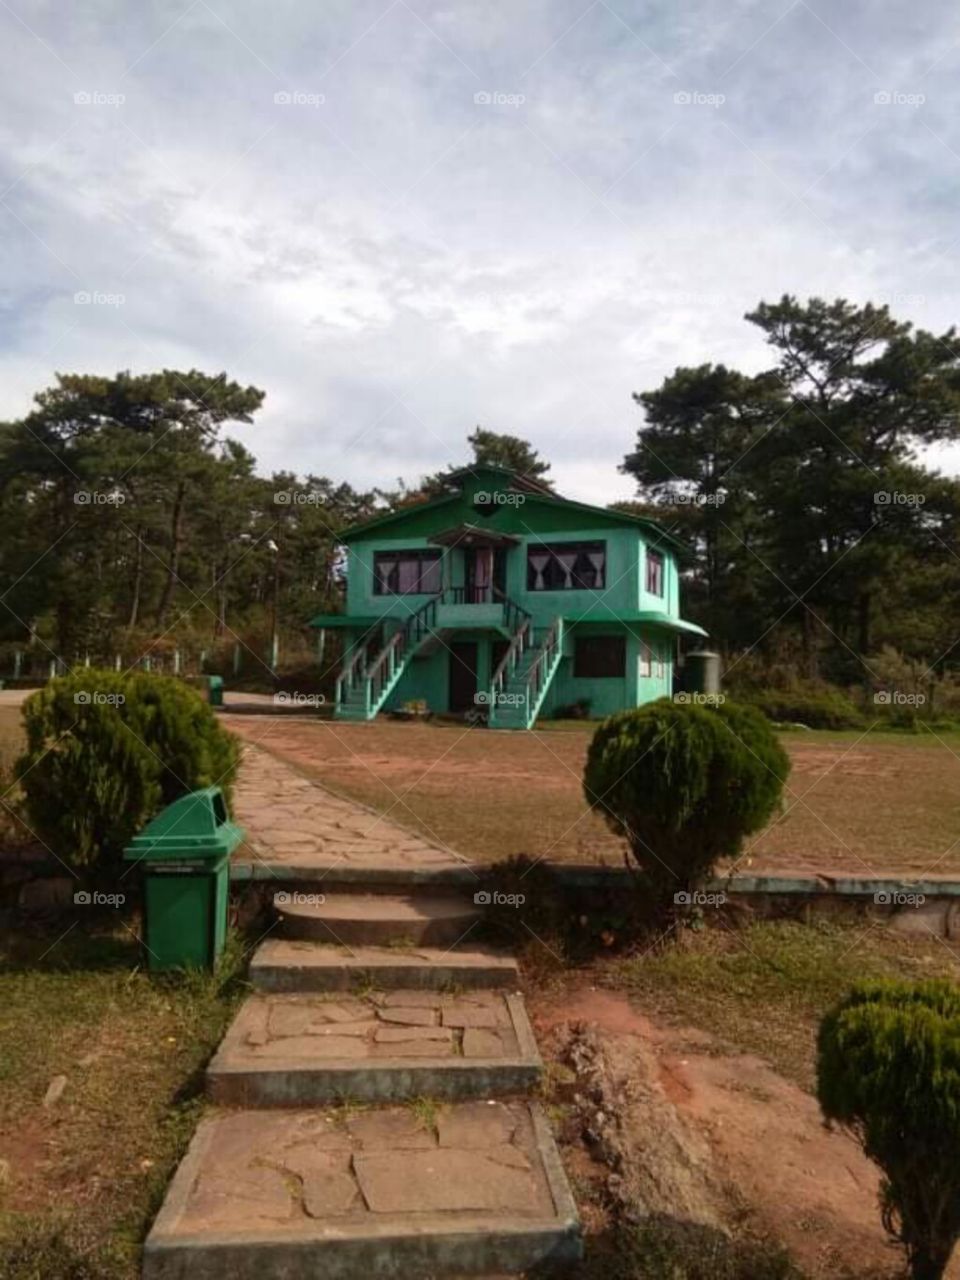 In the compound with green colour house and trees